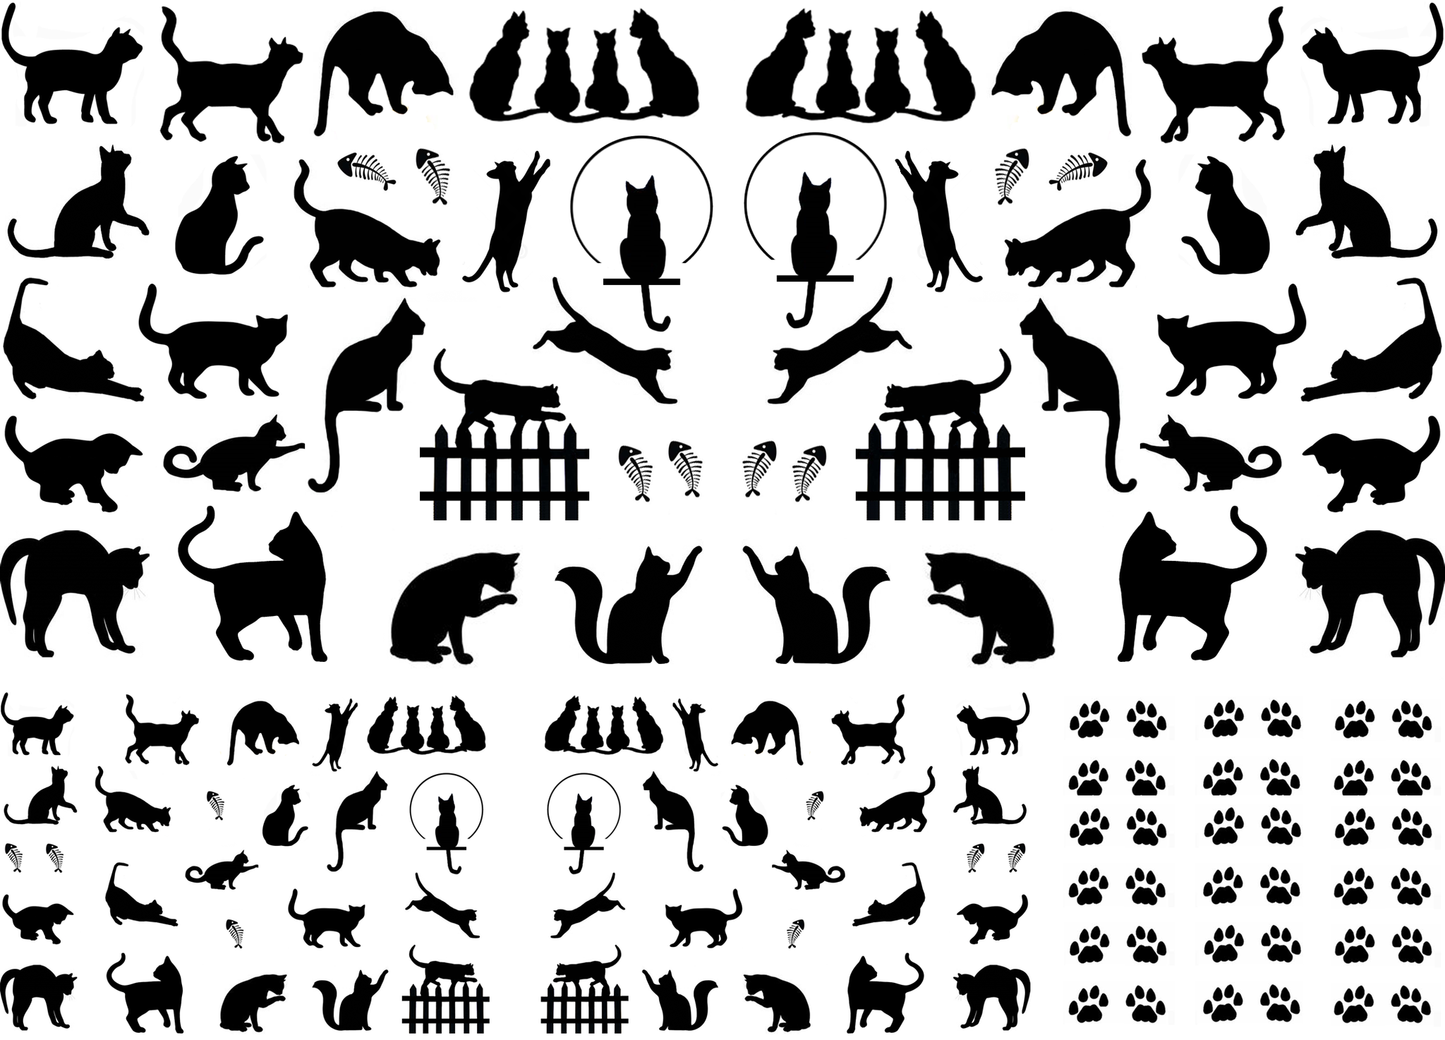 Mini Cats 141 pcs 1/4" to 1" Black Fused Glass Decals